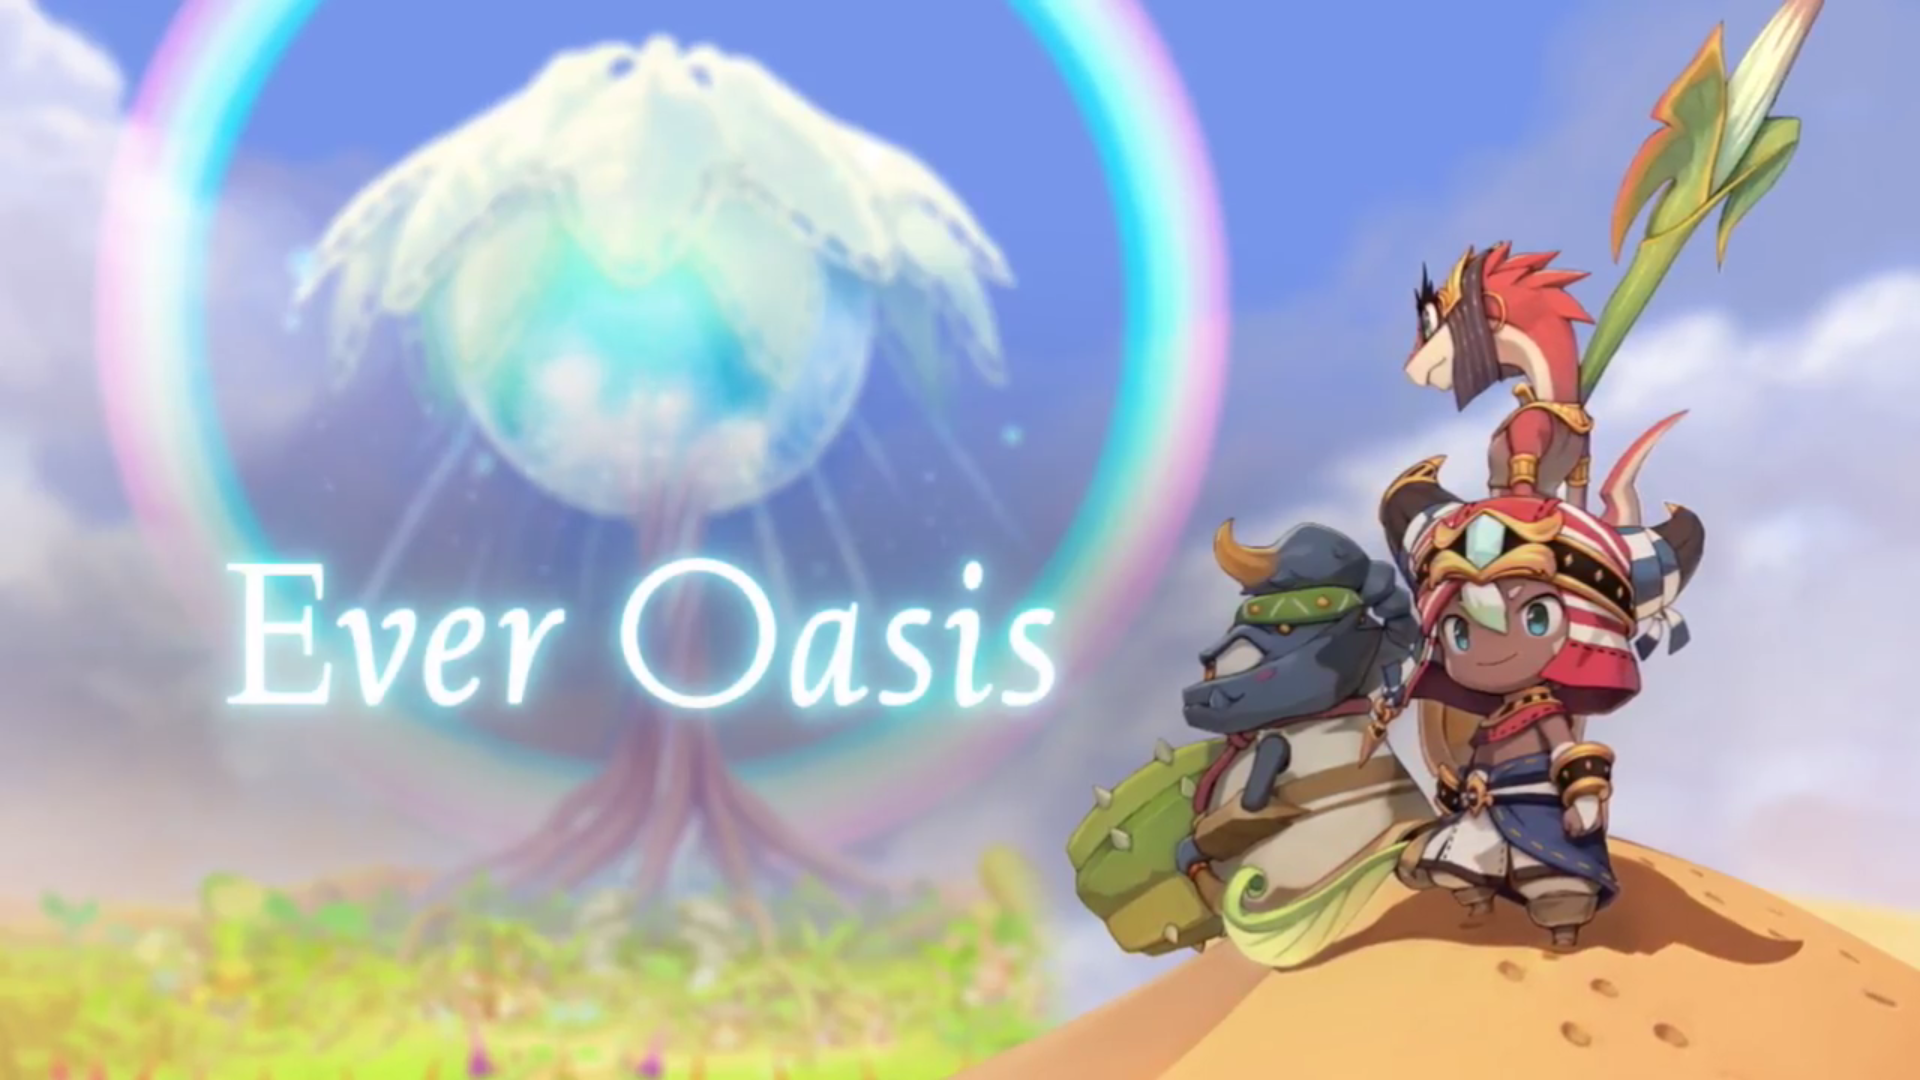 Image for Nintendo's latest IP is called Ever Oasis